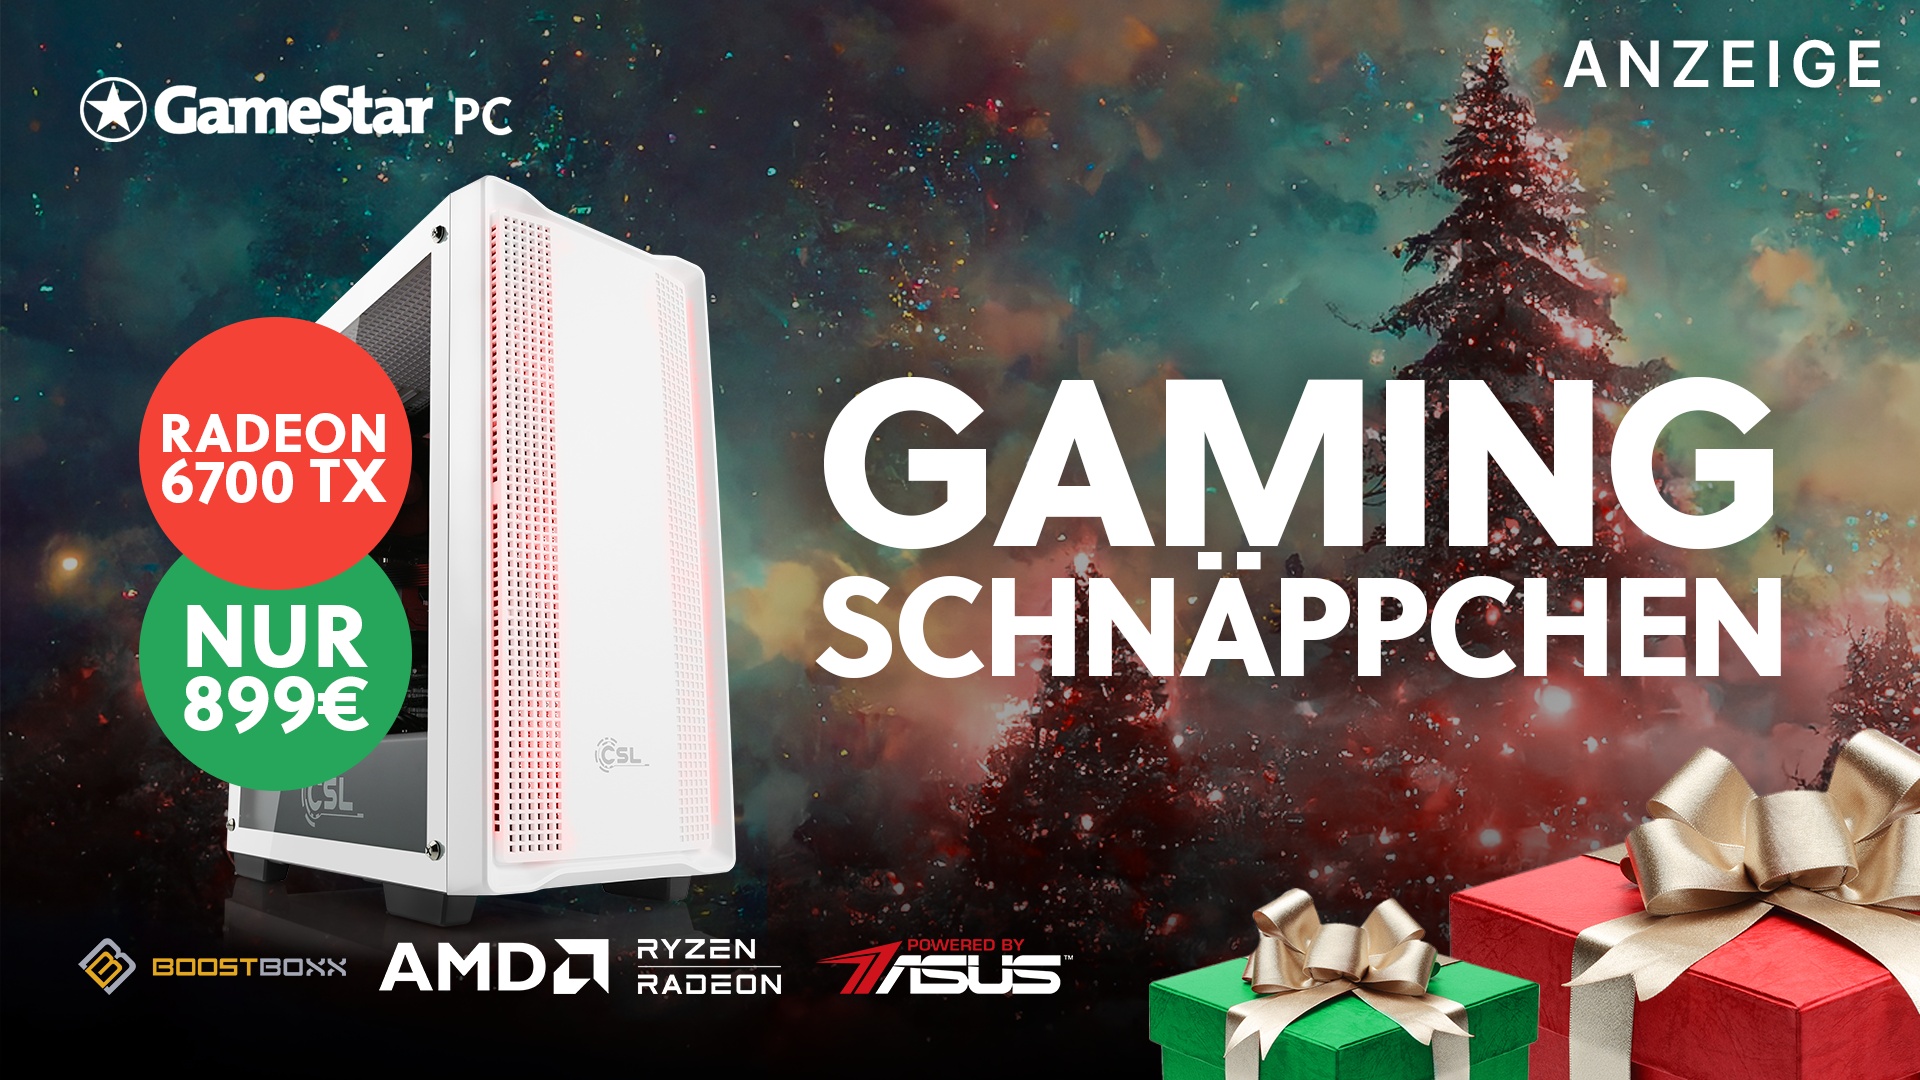 The GameStar PC Christmas Edition WQHD offers a lot of power for the money